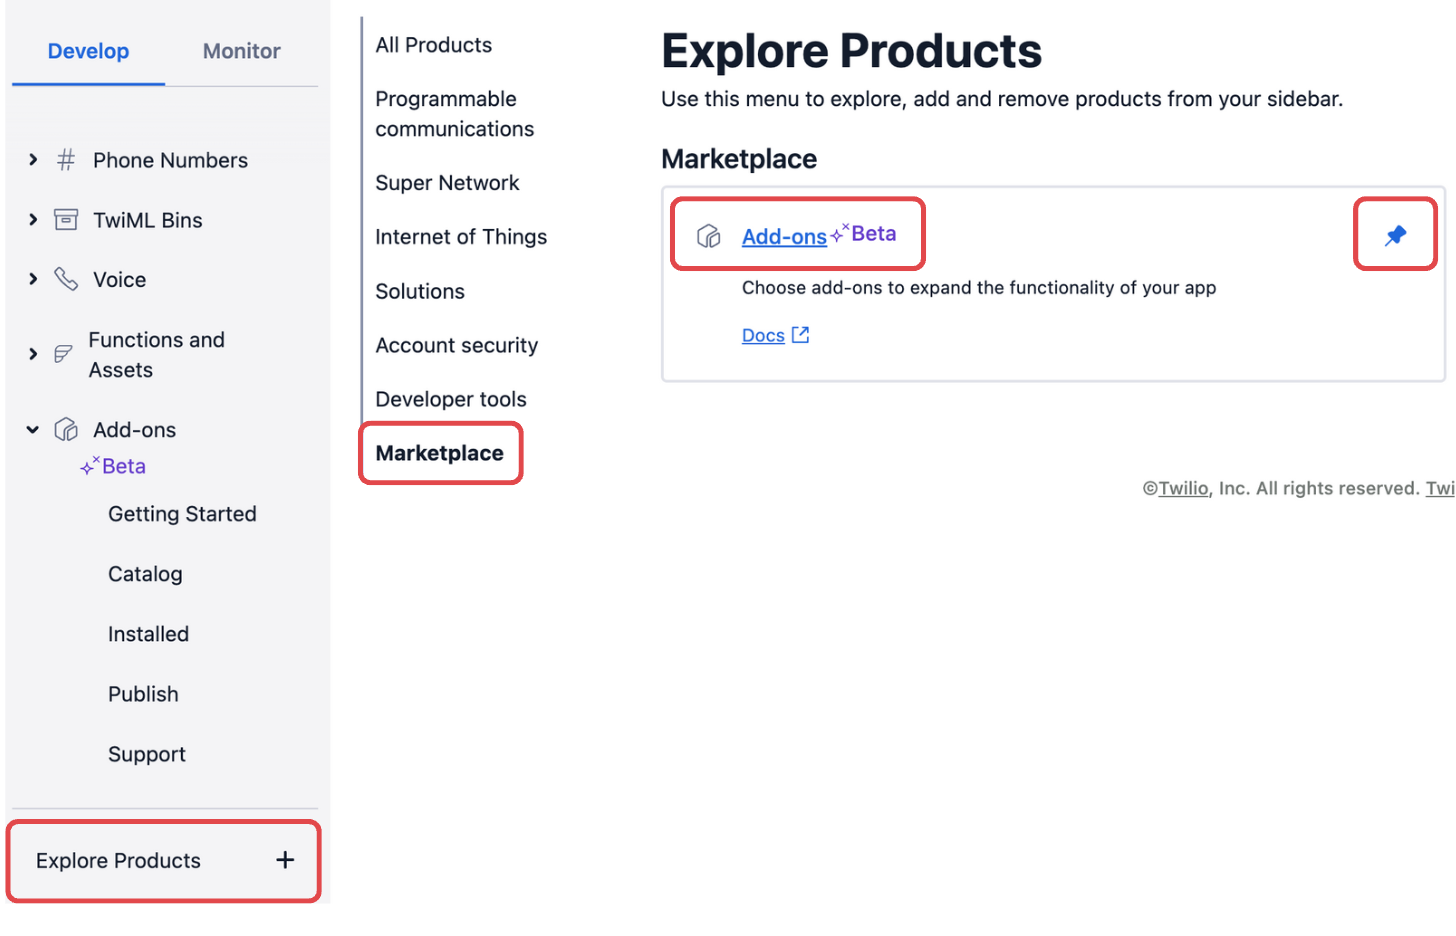 Find Add-ons in Console by clicking on Explore Products > Marketplace > Add-ons. Click the pin icon to pin to your Console navigation.